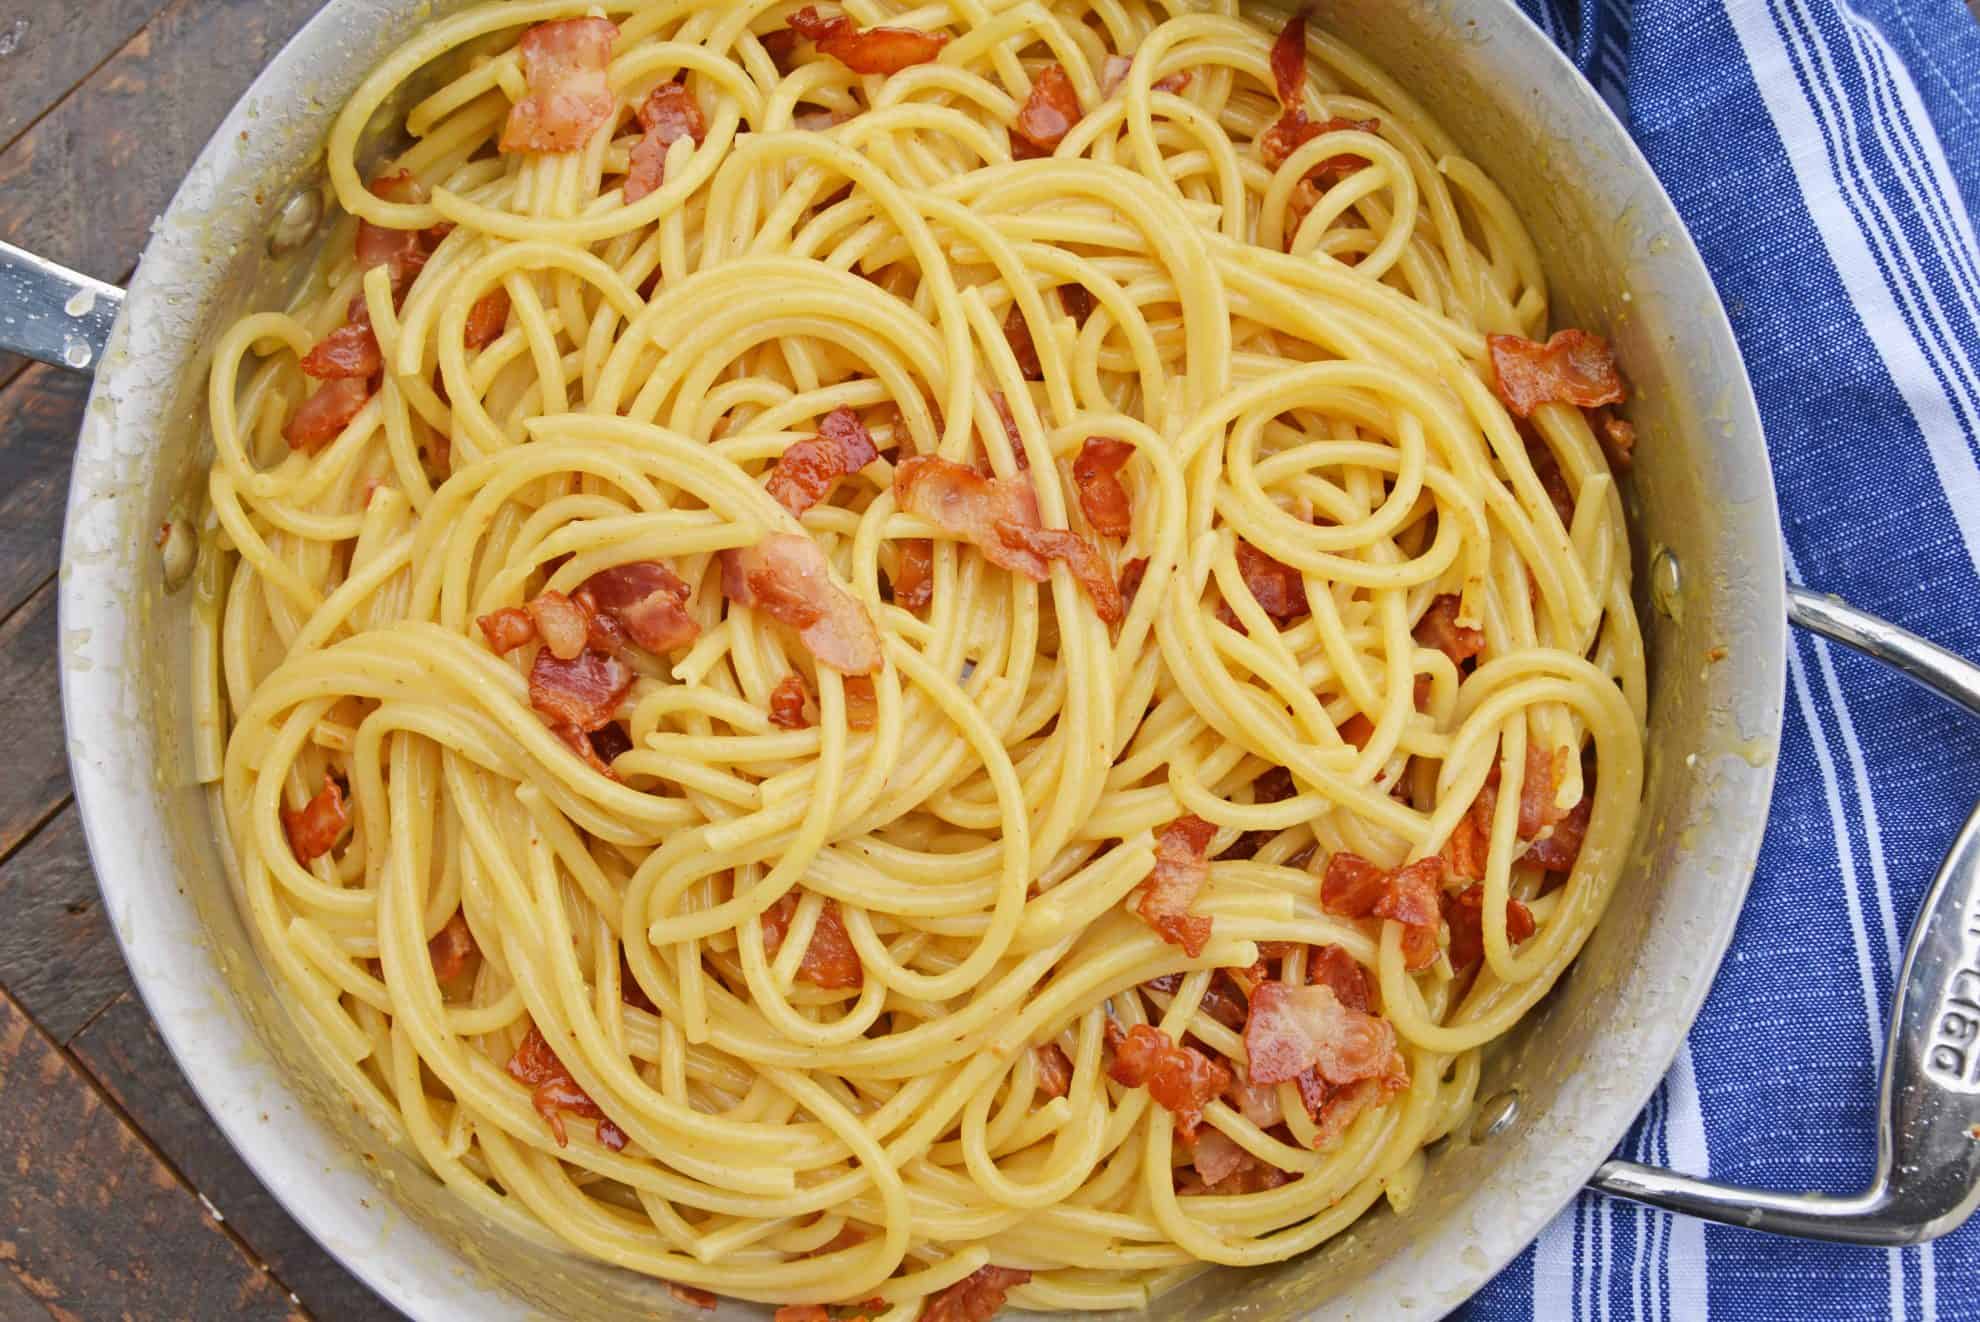 Authentic Carbonara is an easy Italian pasta recipe using eggs, cheese and bacon. This is an easy carbonara recipe that any home cook can feel confident in making! #easycarbonara #spaghetticarbonara #authenticcarbonara www.savoryexperiments.com